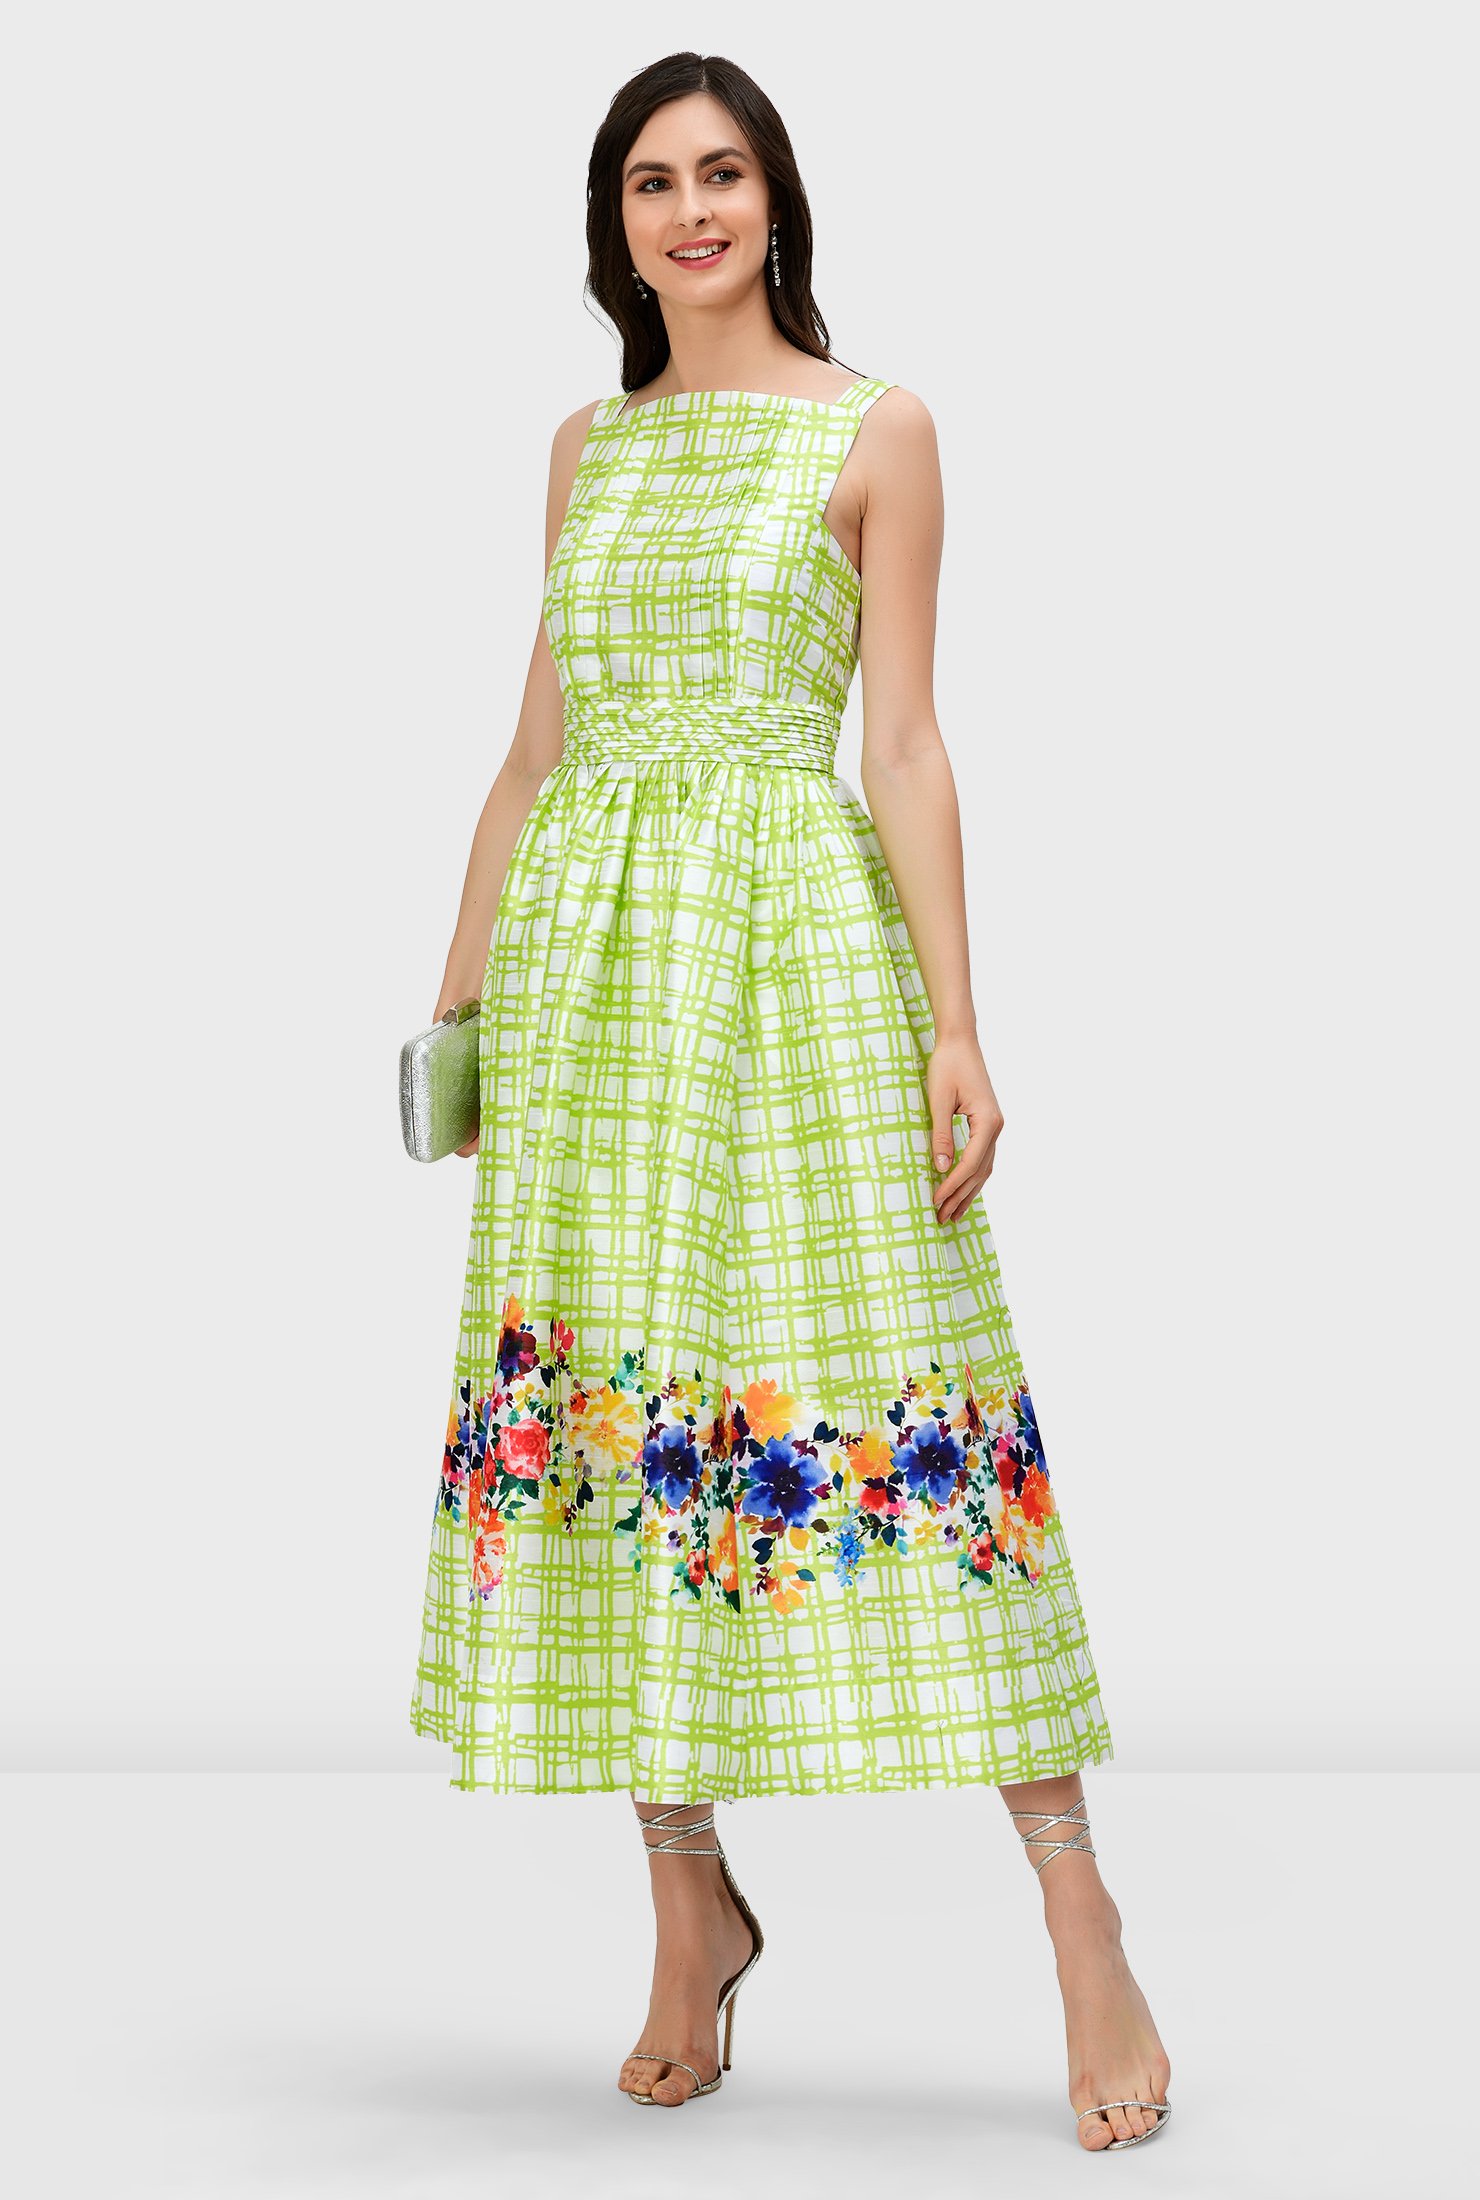 Watercolor florals pop up in vibrant hues on our check print polydupioni dress styled with a fitted bodice and full flared skirt while a trapunto banded waist cinches in the flattering silhouette.